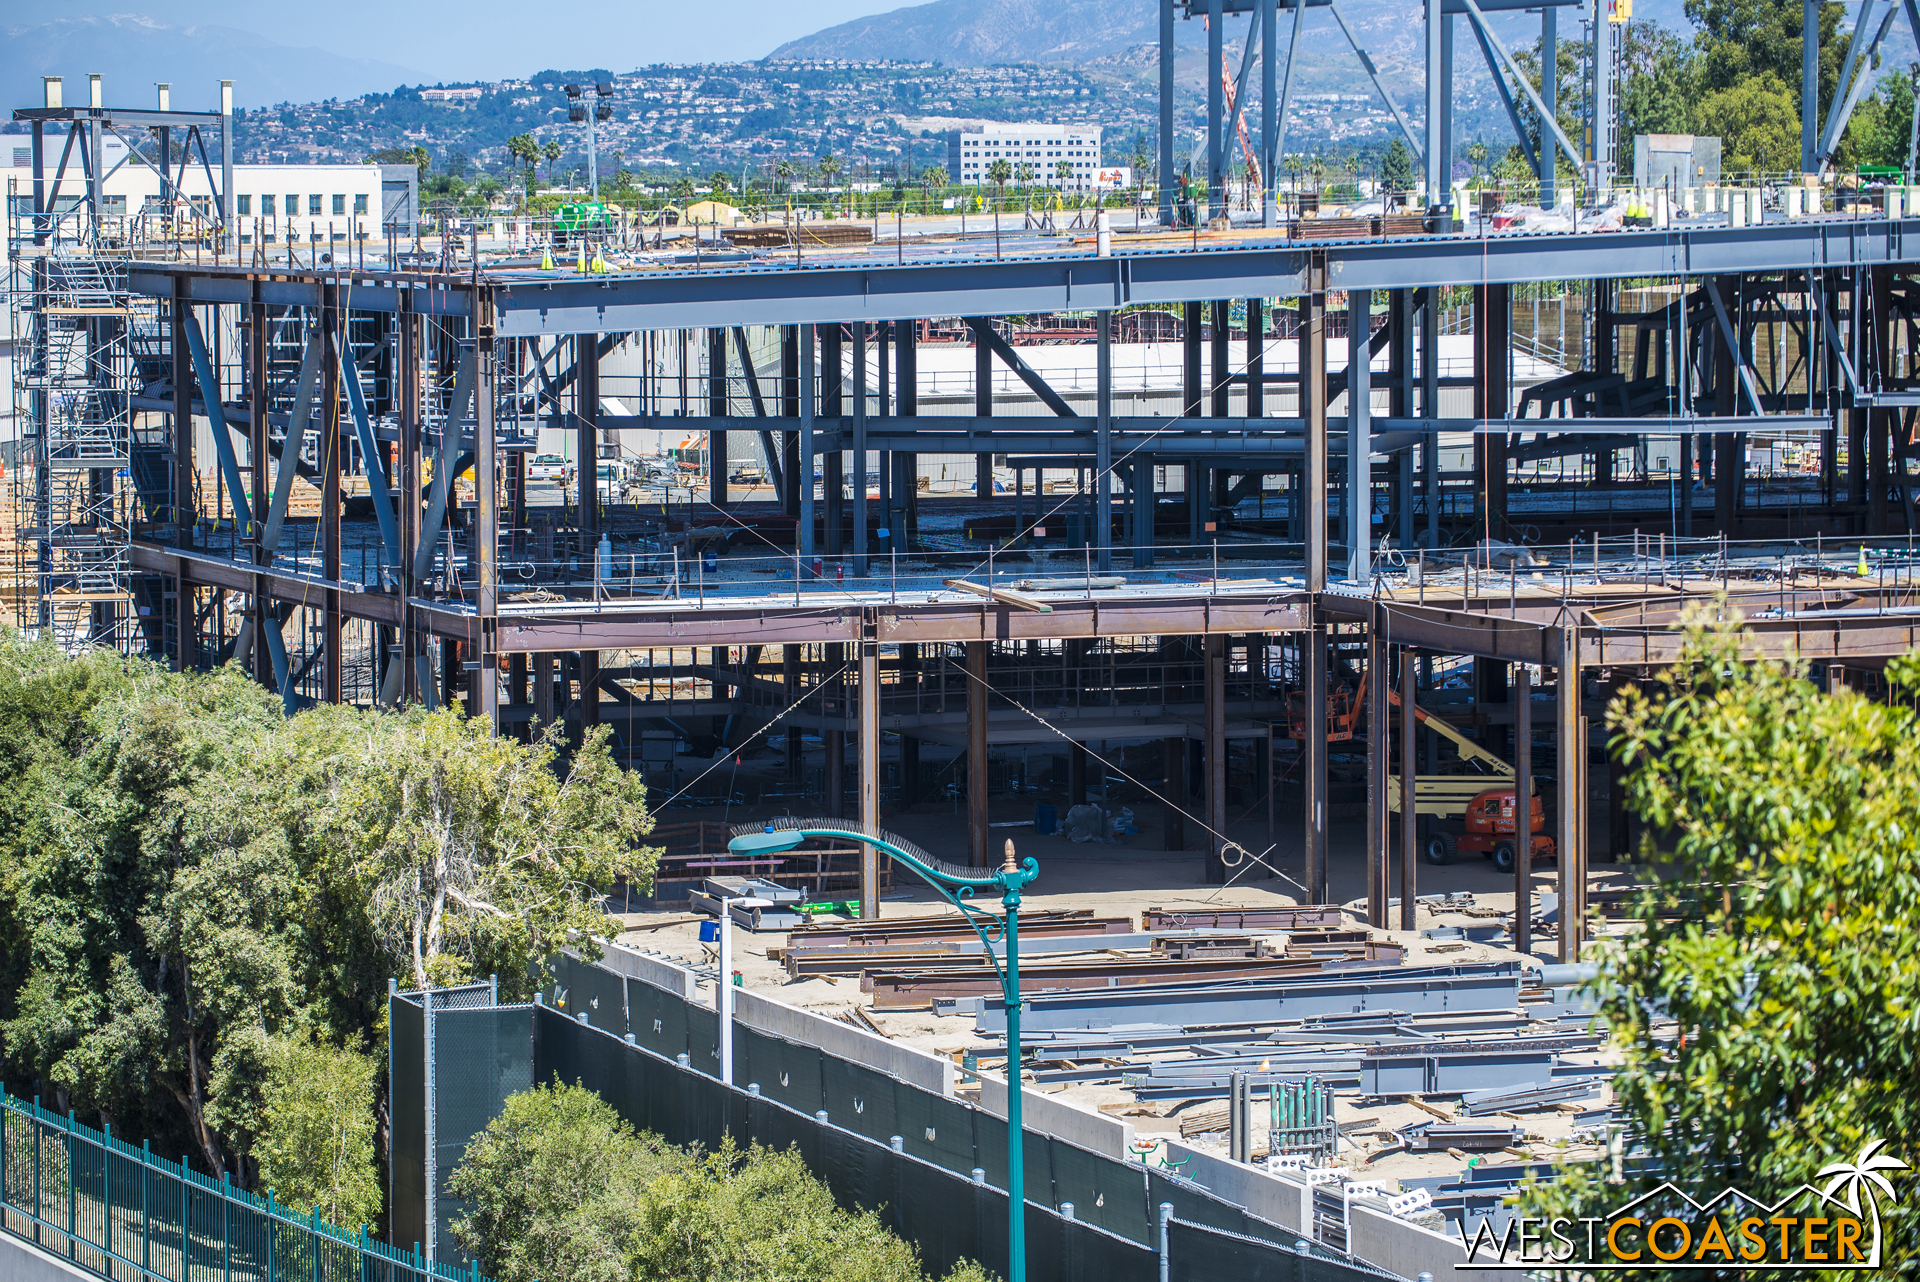  Not too much change on this side, at least not along the main skeleton.&nbsp; But secondary steel framing to support ride elements seems to be progressing. 